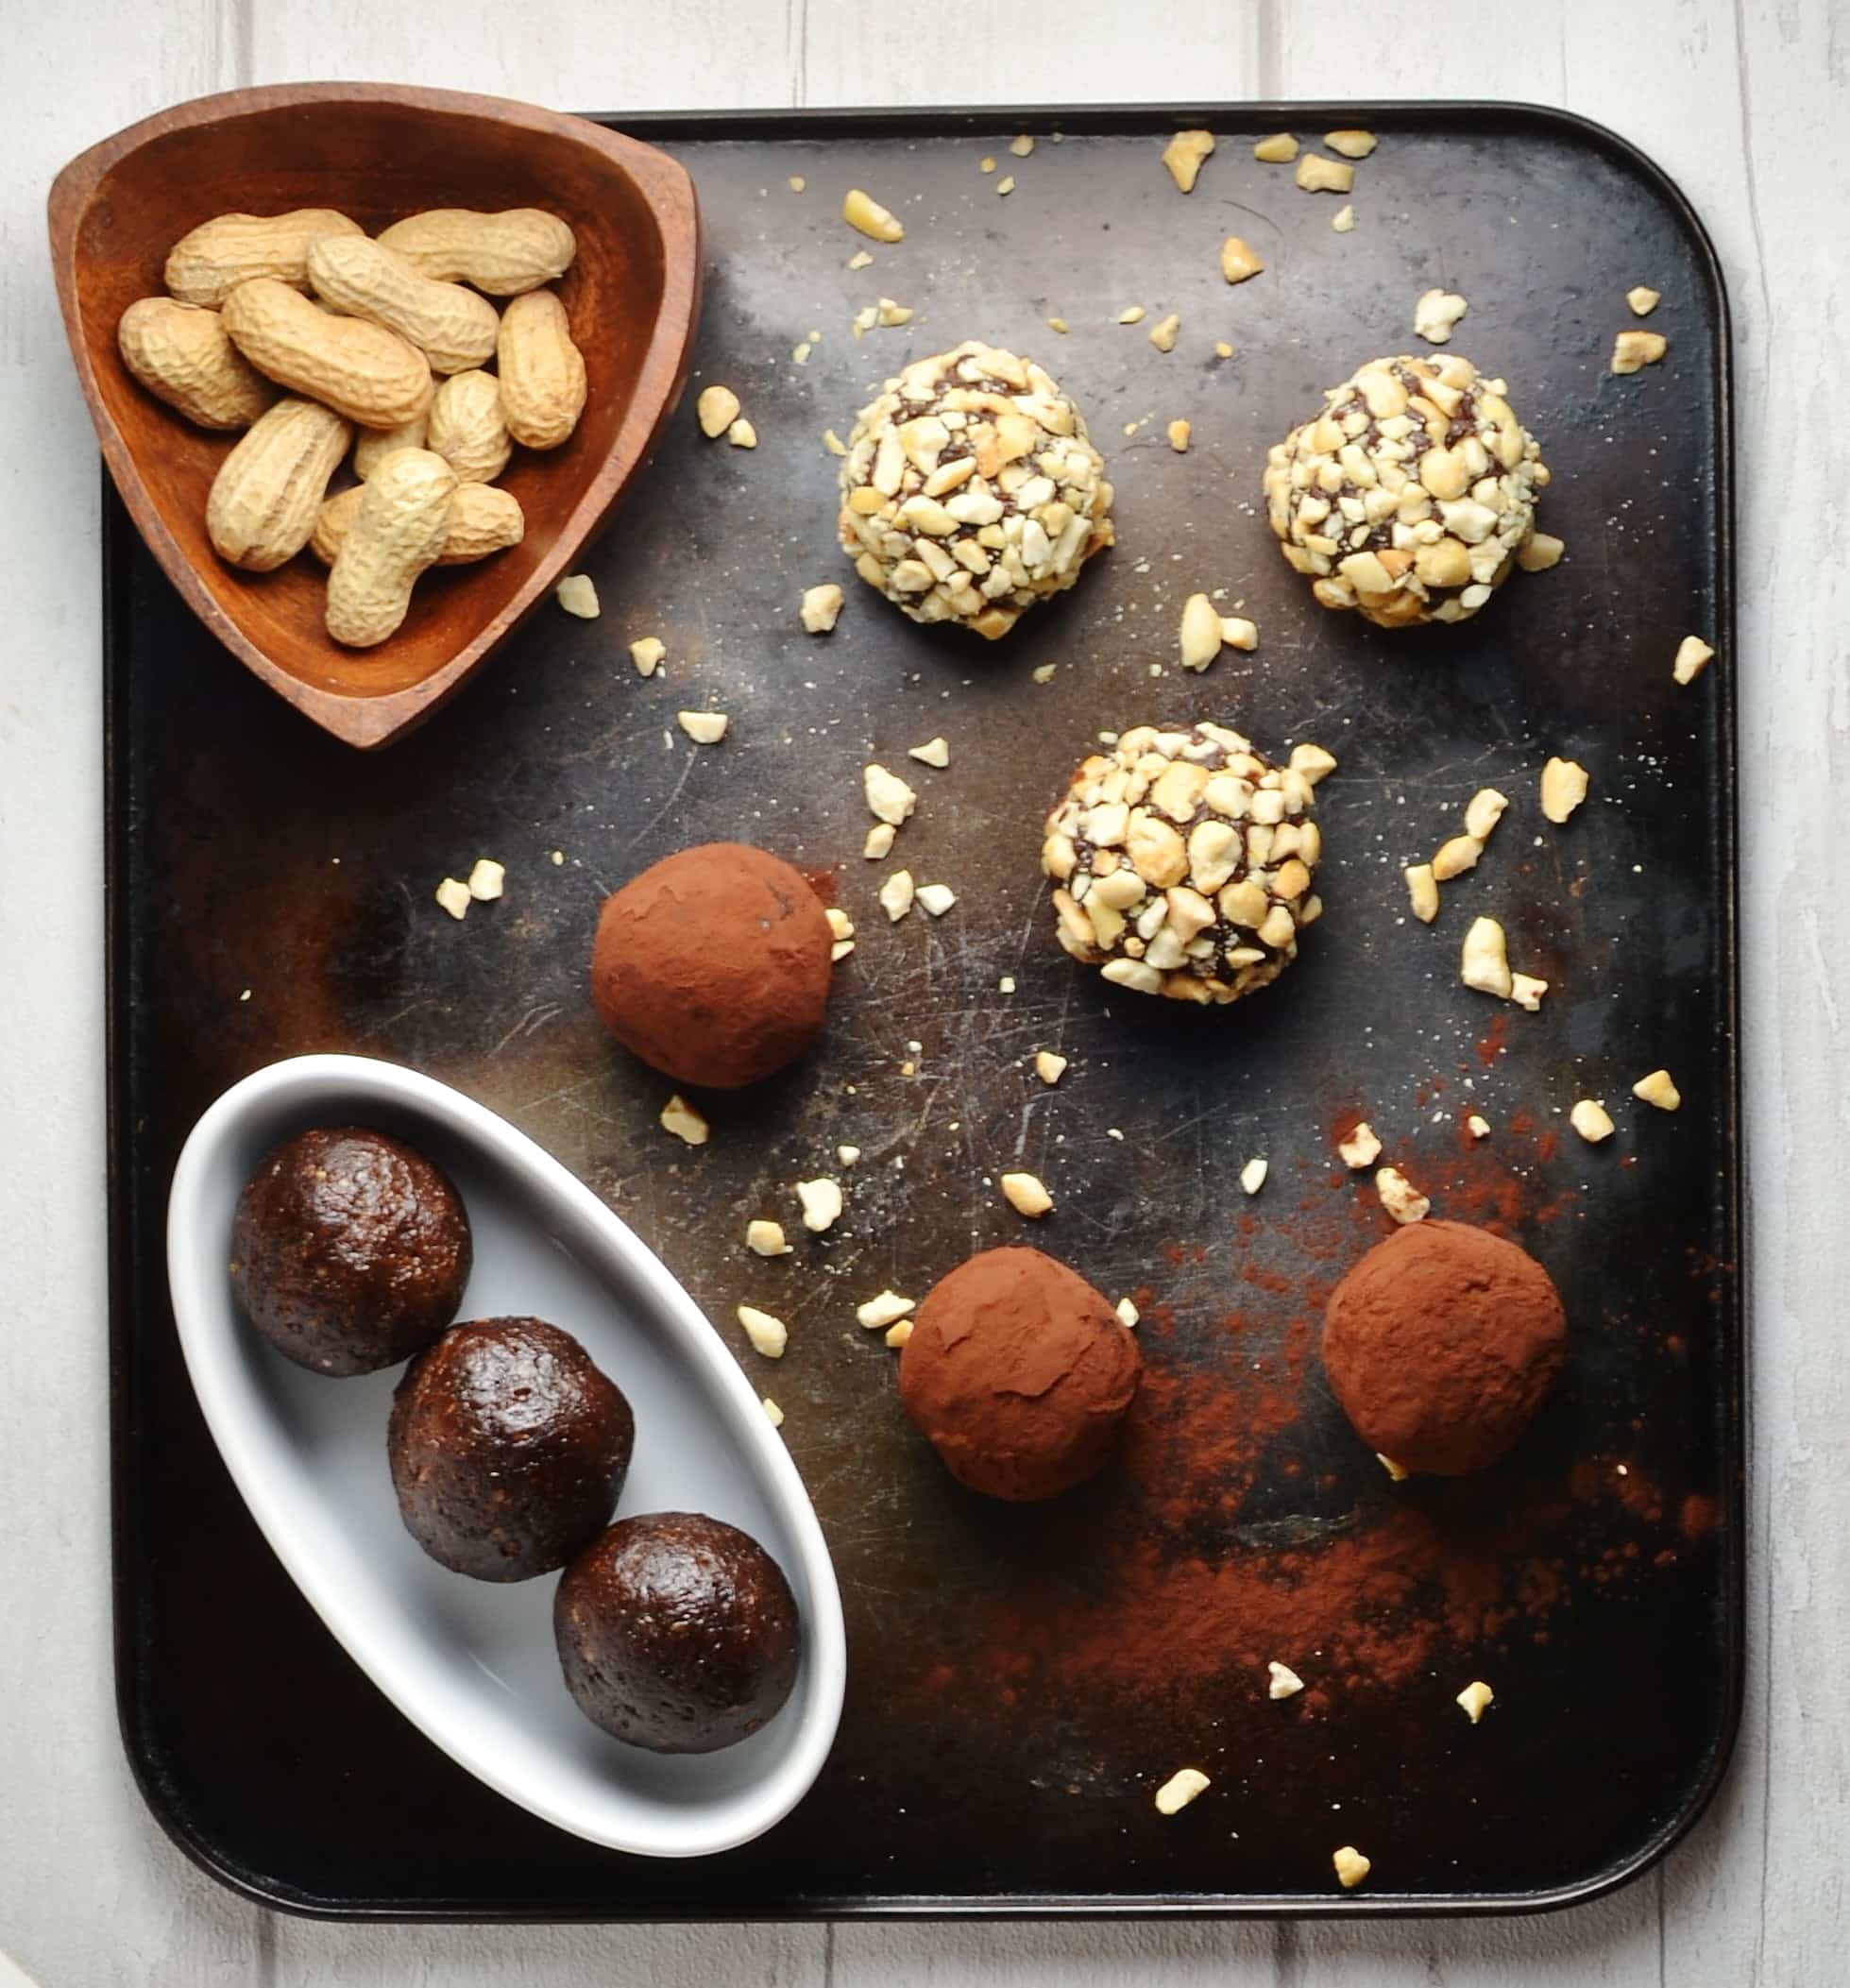 Top down view of nut and cocoa coated energy balls in white dish with peanuts in brown dish on top of dark tray.